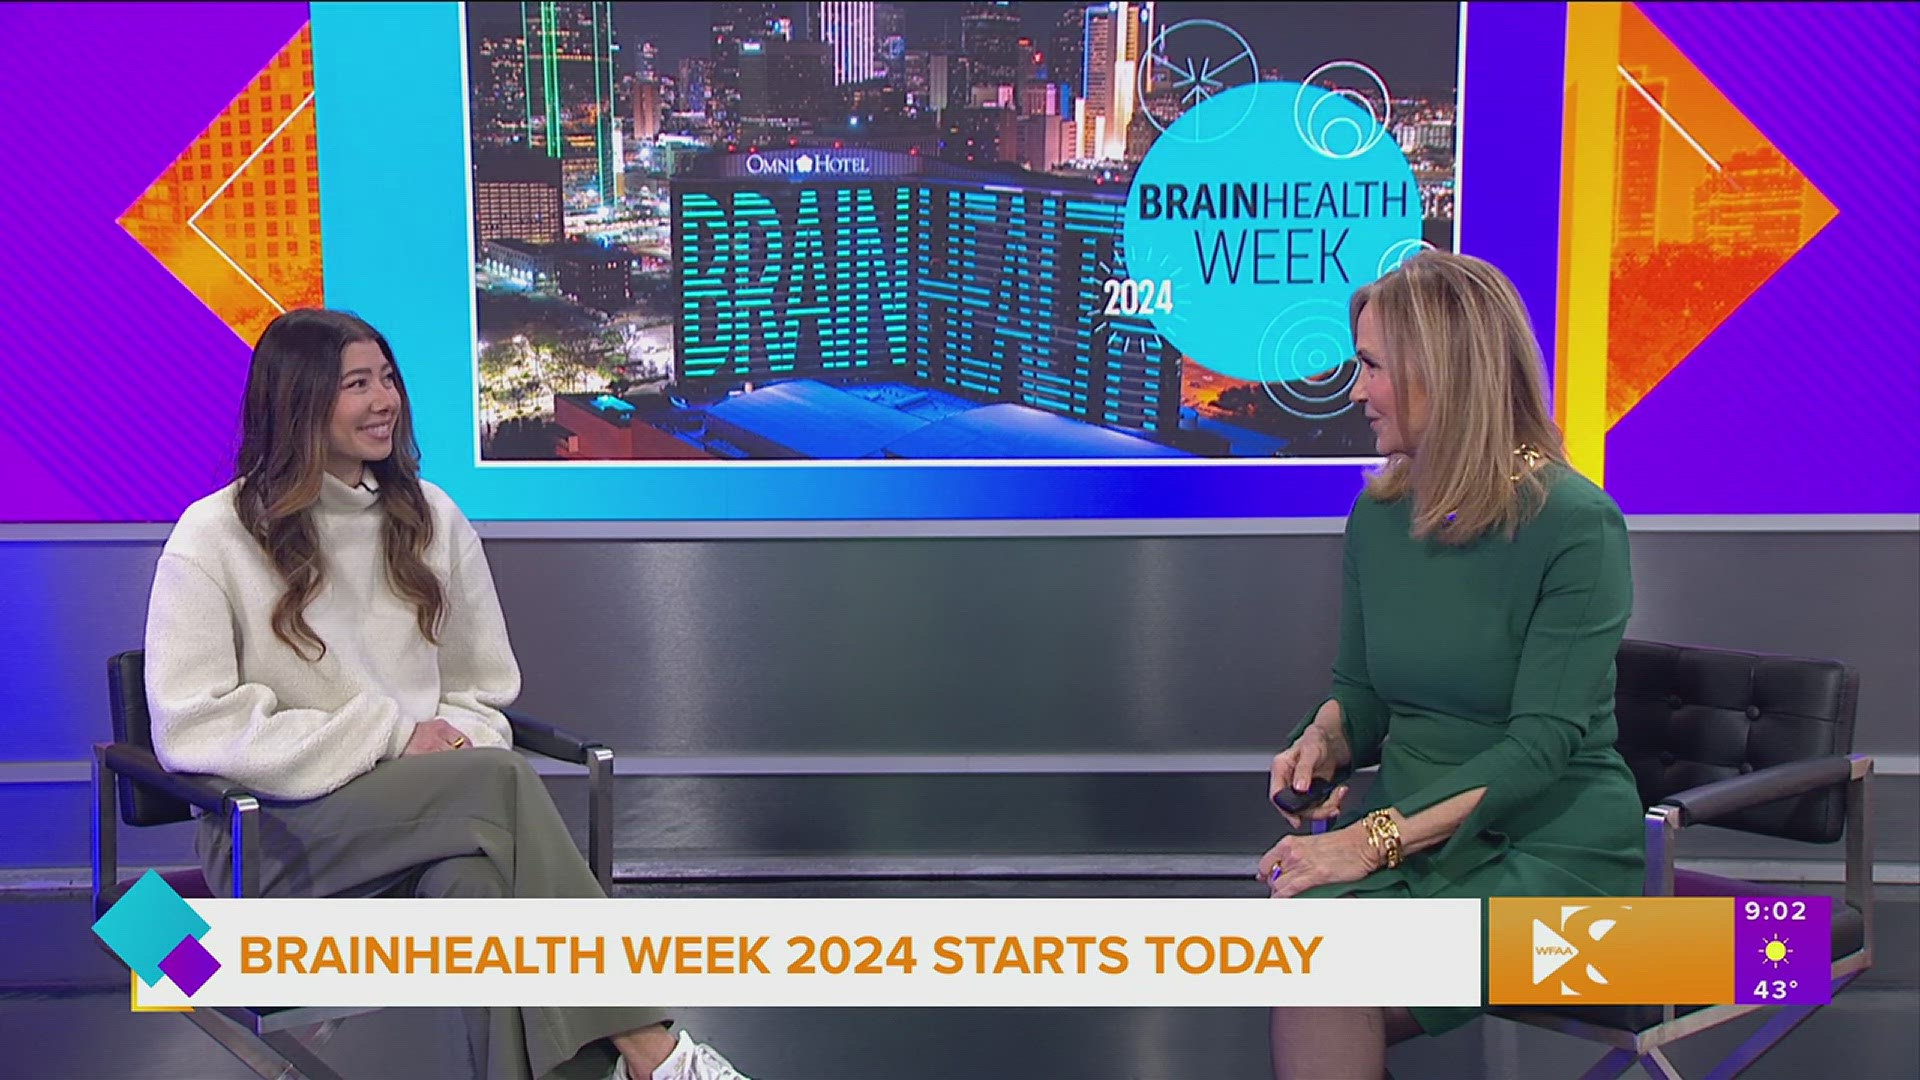 Cognitive Neuroscientist Dr. Julie Fratantoni of UT Dallas Center for BrainHealth shares what you can do to take part in BrainHealth Week February 19-24.